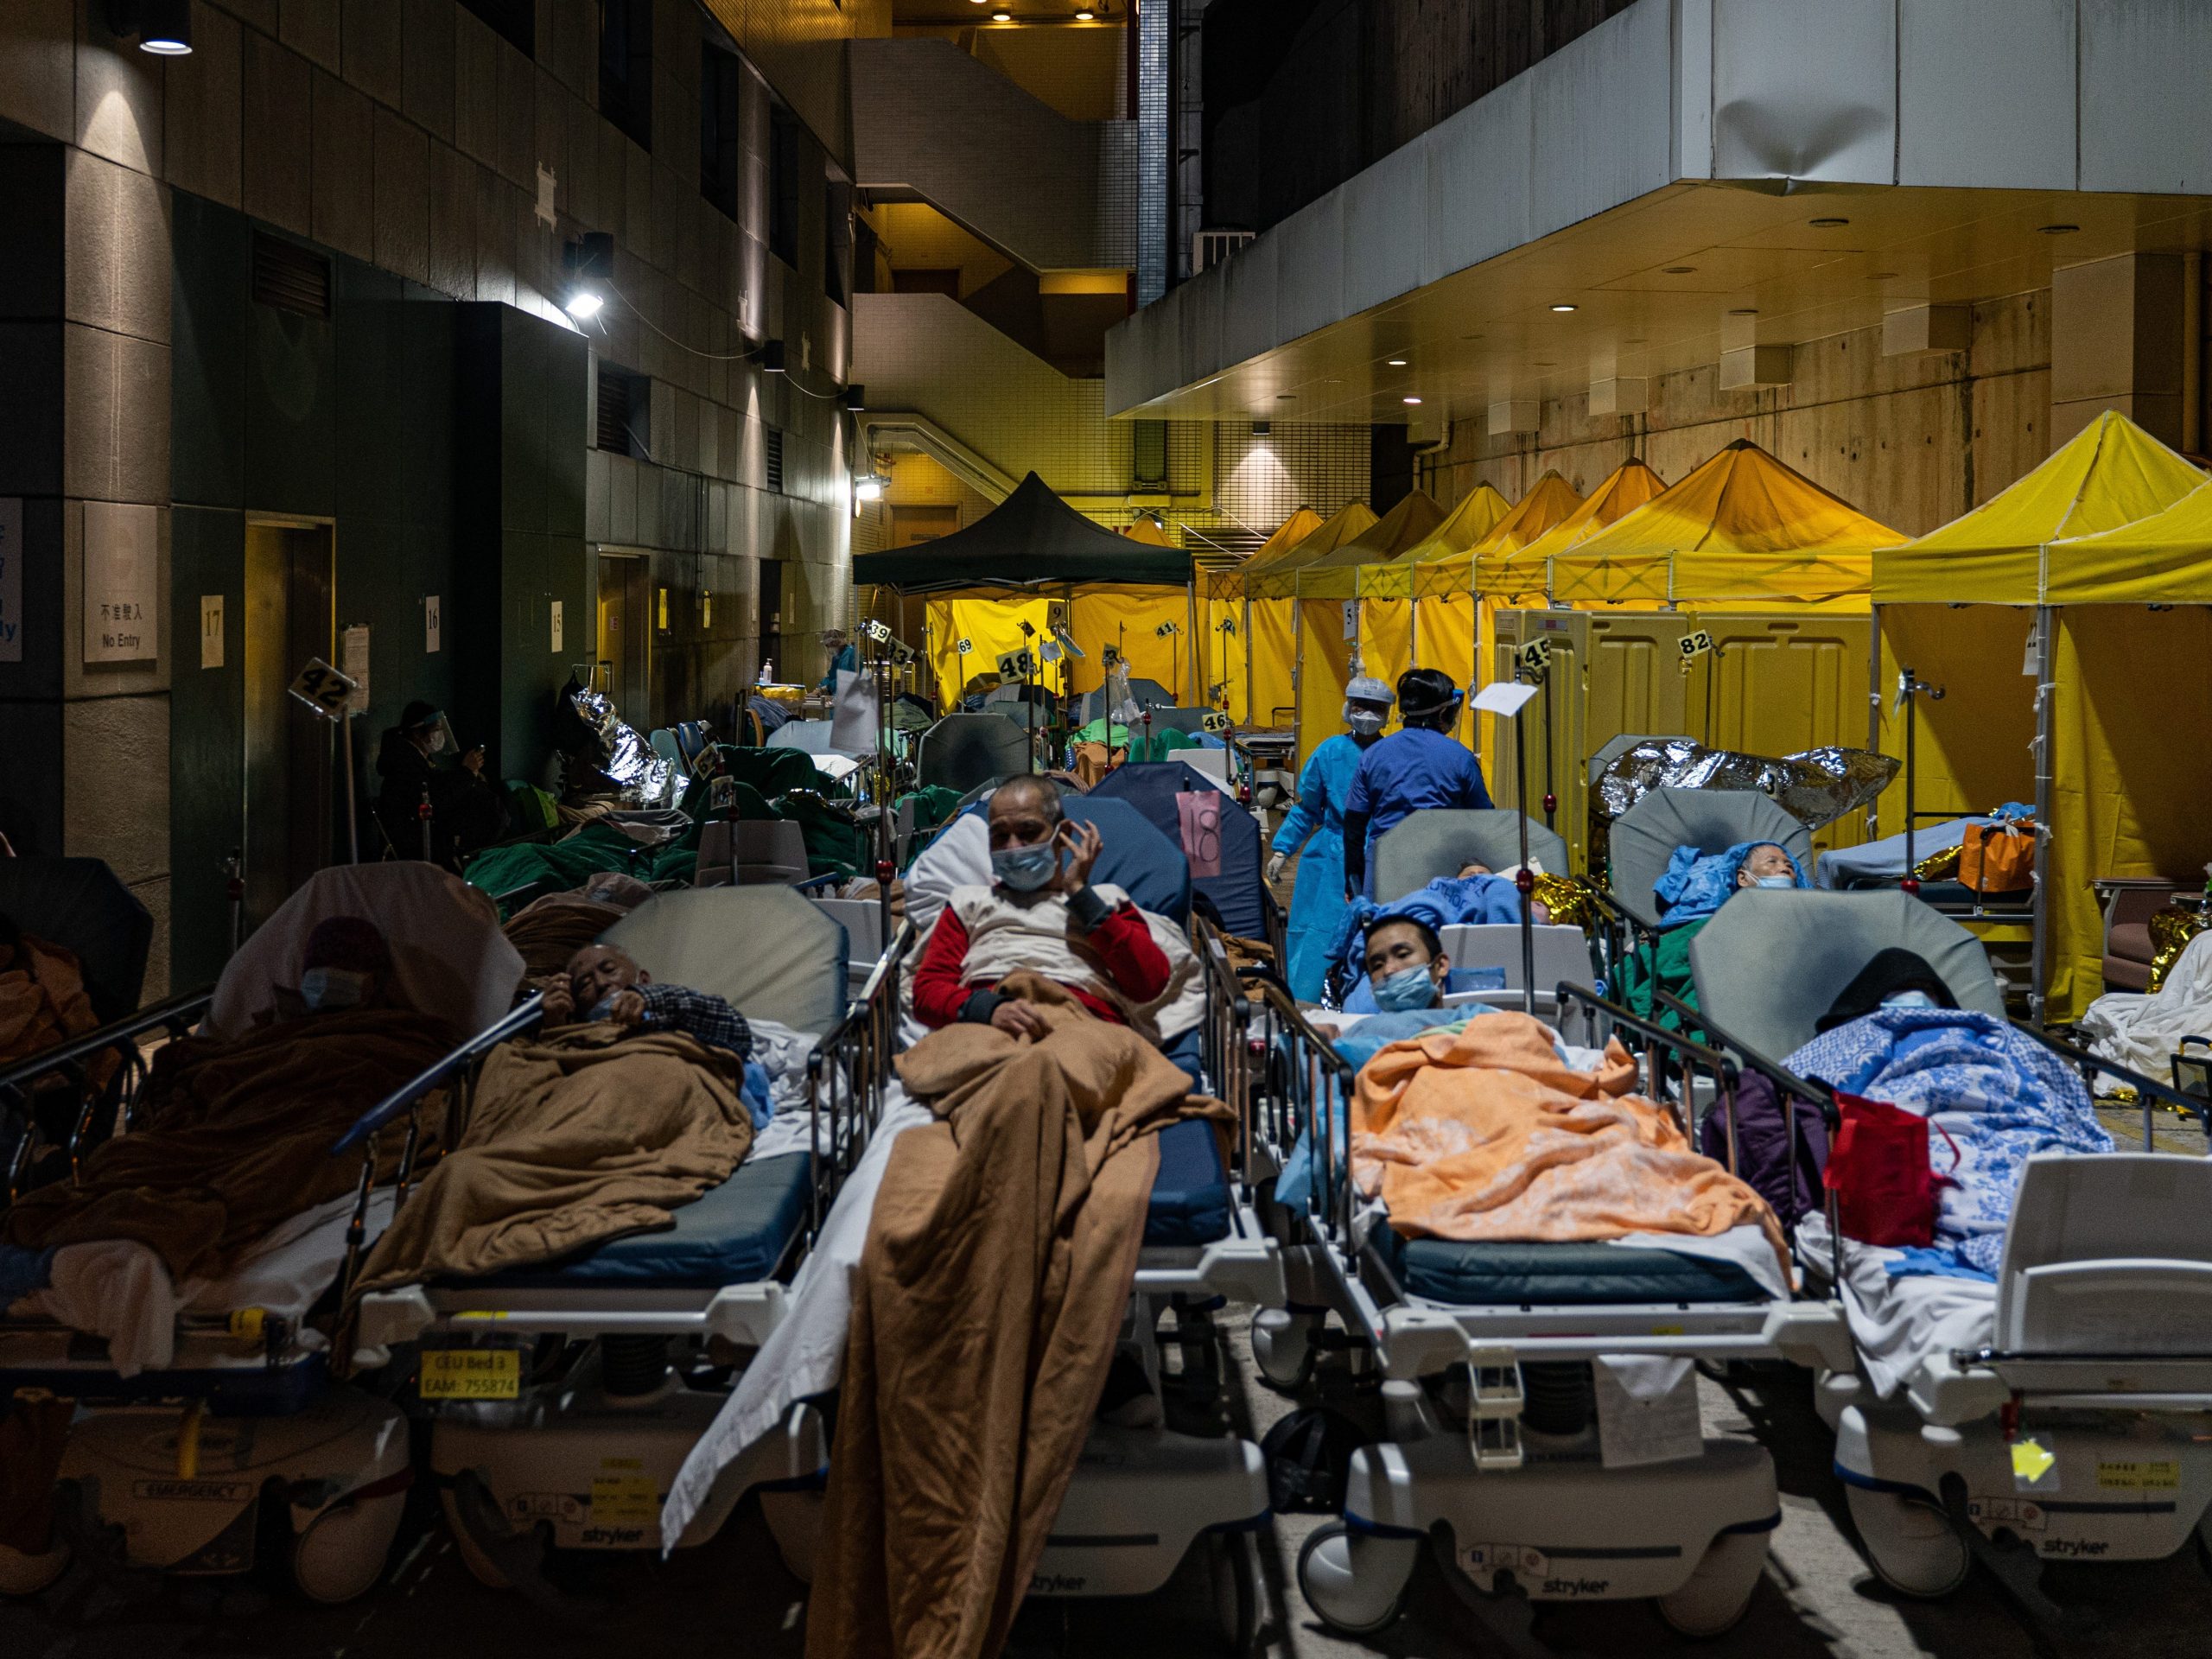 On February 16, 2022, in a temporary shelter outside Caritas Medical Center in Hong Kong, China, a patient lies in a hospital bed waiting for medical treatment.